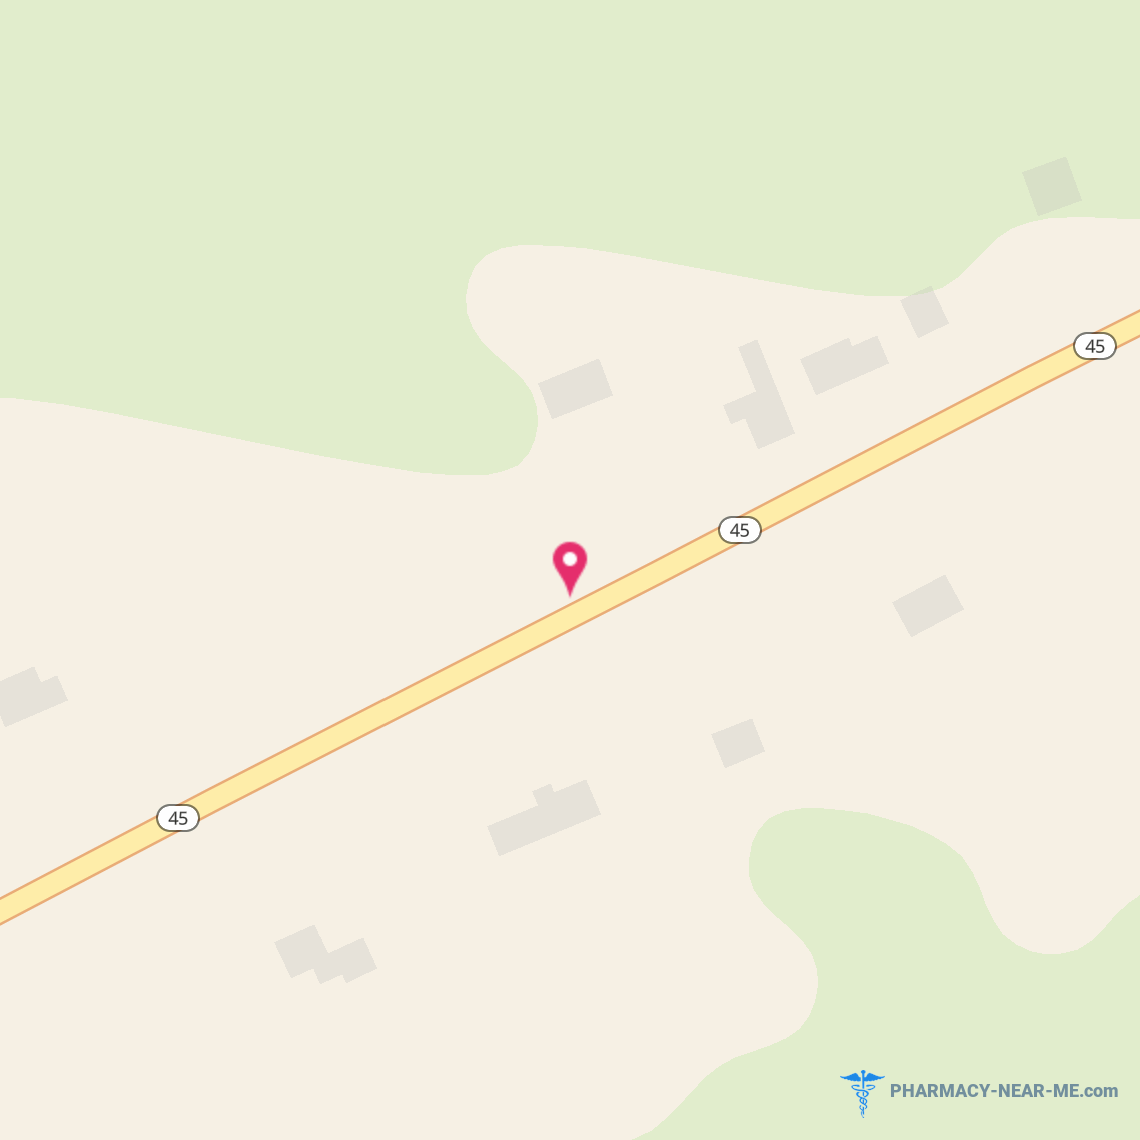 JOHNSON FAMILY PHARMACY INC - Pharmacy Hours, Phone, Reviews & Information: 1756 Anderson Highway, Cumberland, Virginia 23040, United States